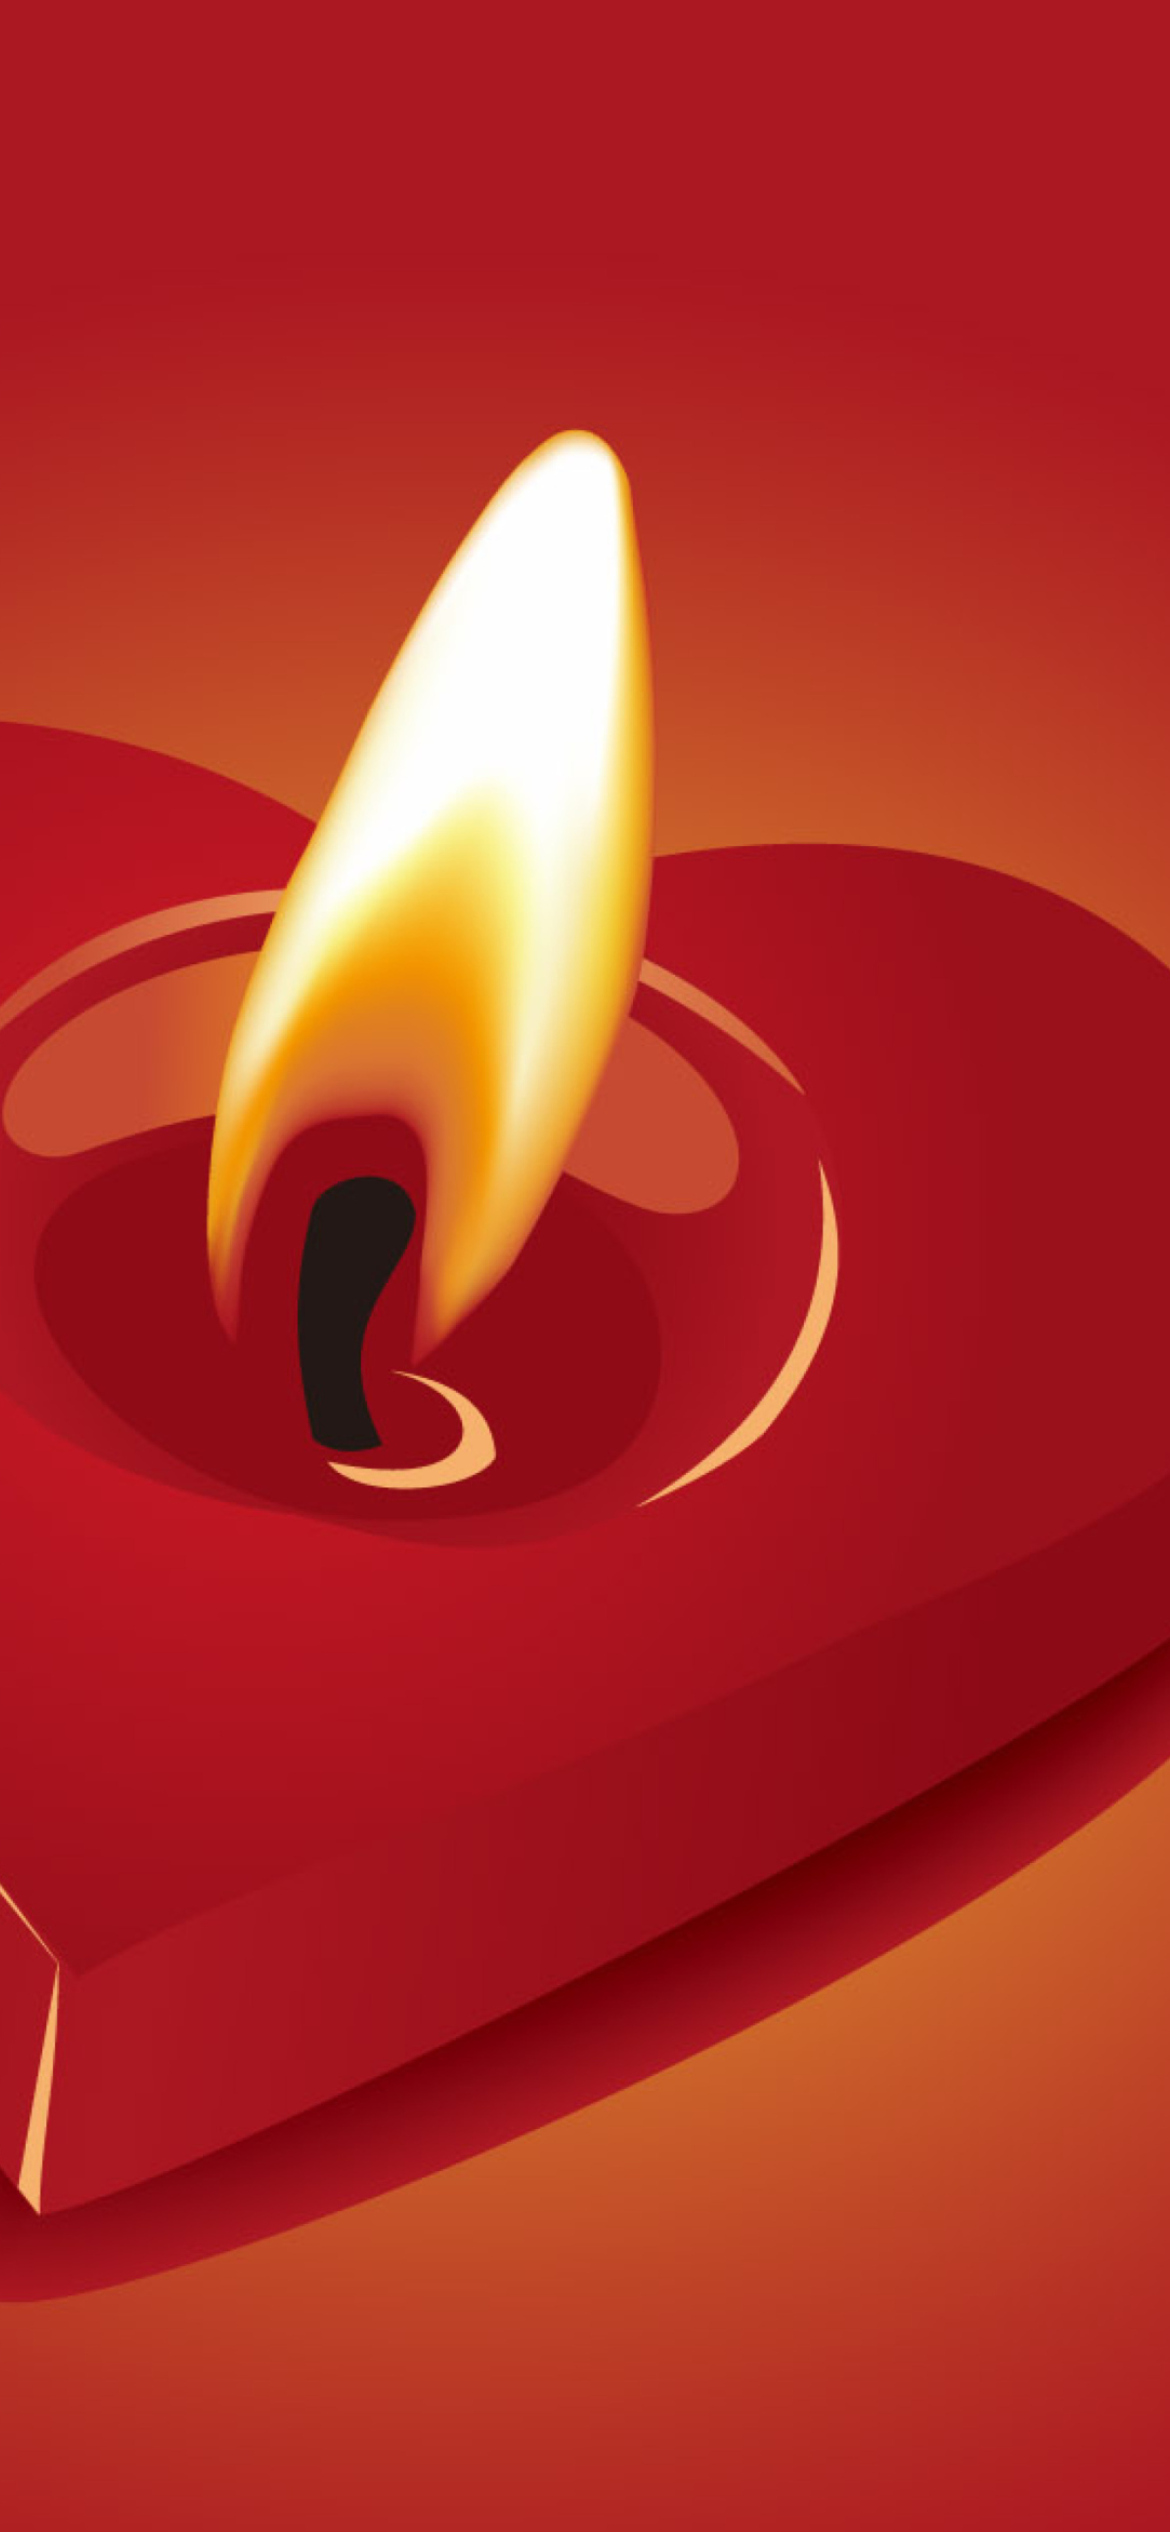 Heart Shaped Candle wallpaper 1170x2532